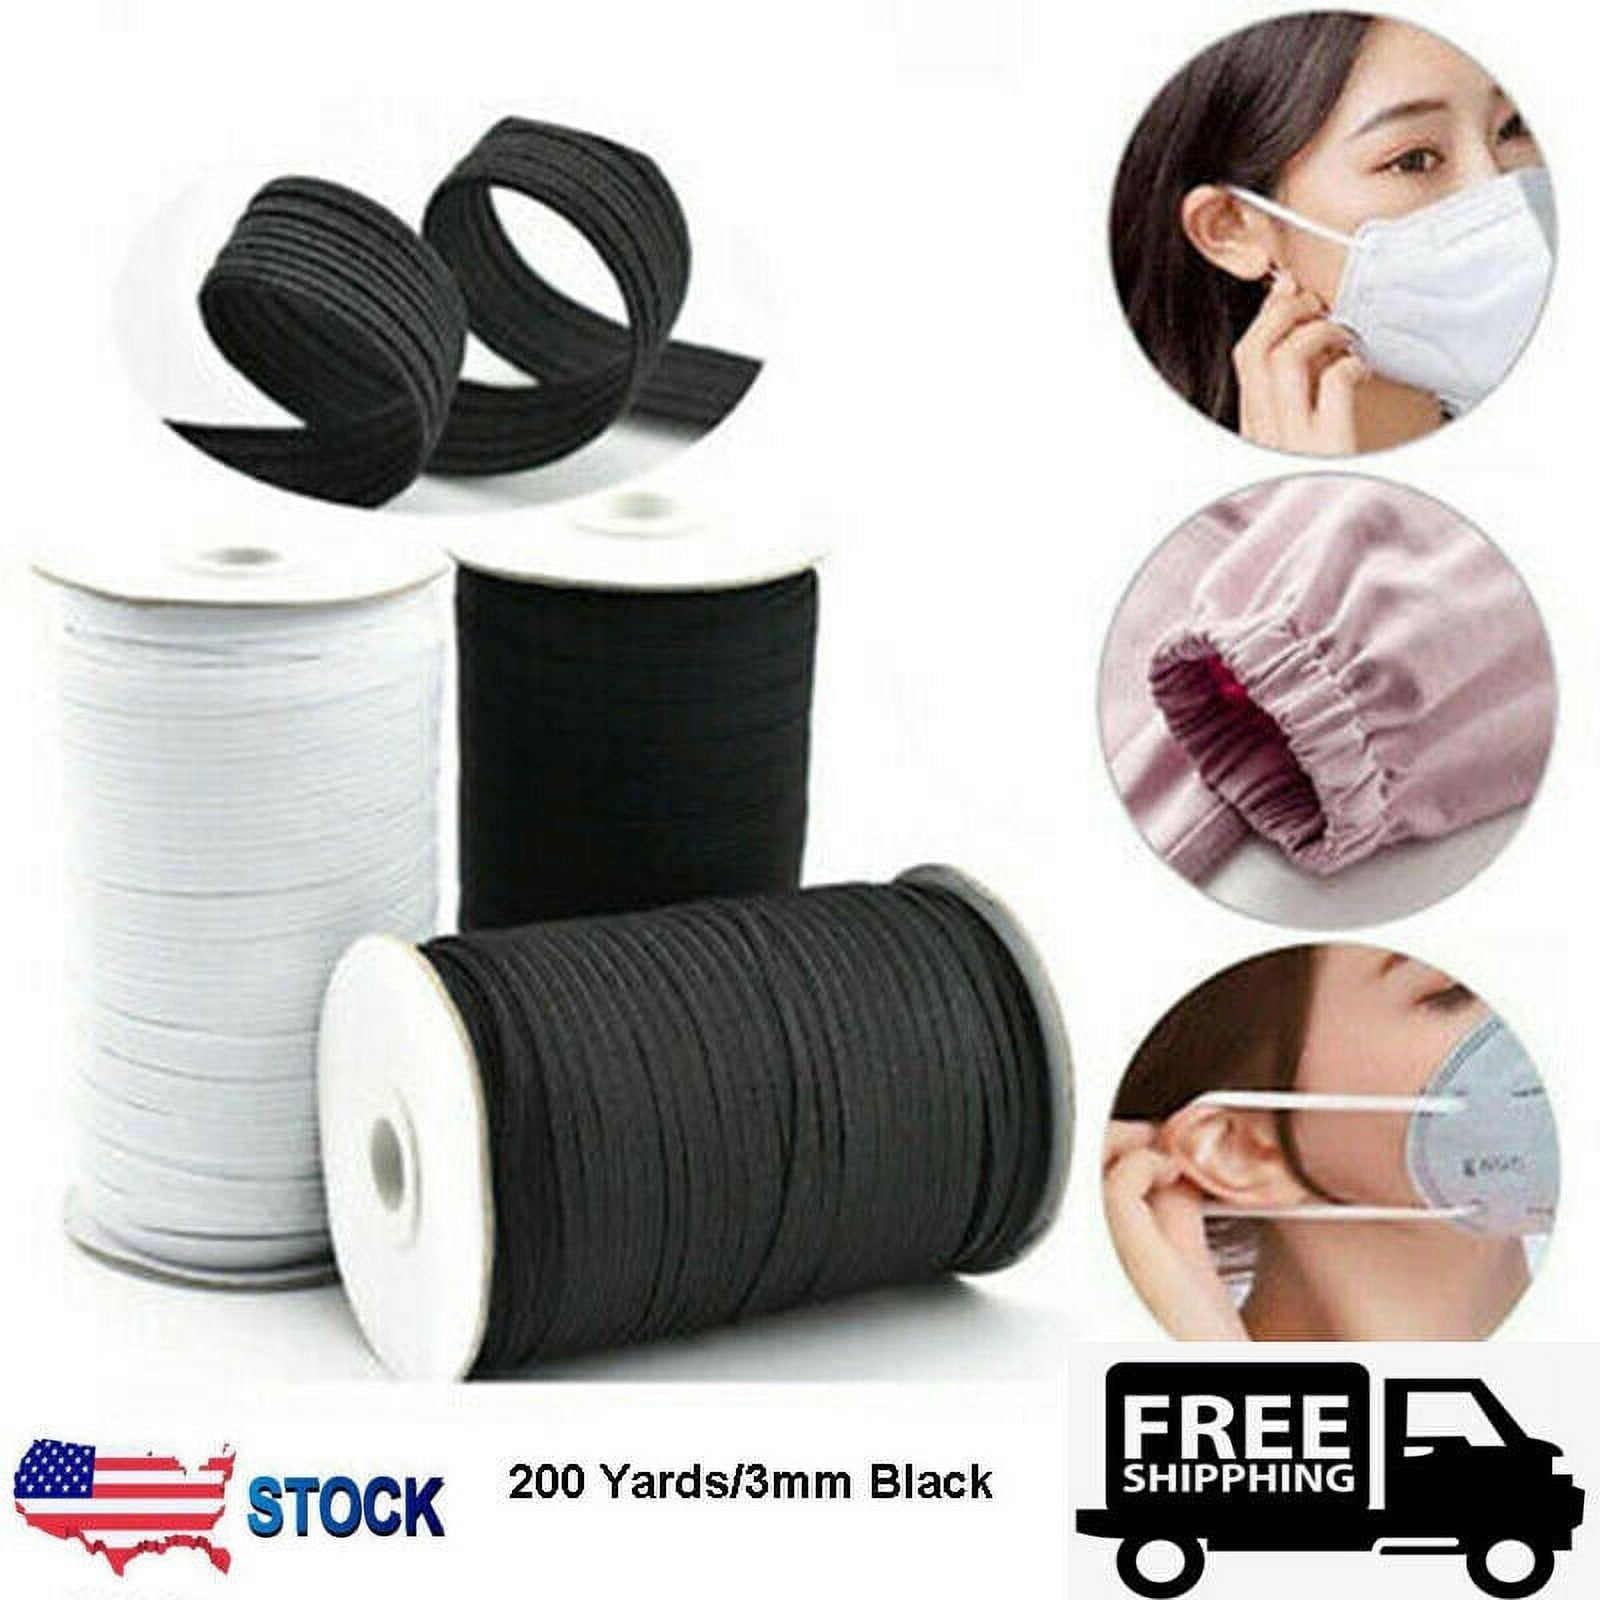 6mm (1/4'') Elastic Band Cord Sewing For DIY Face Masks 10-200 yards  Black/White